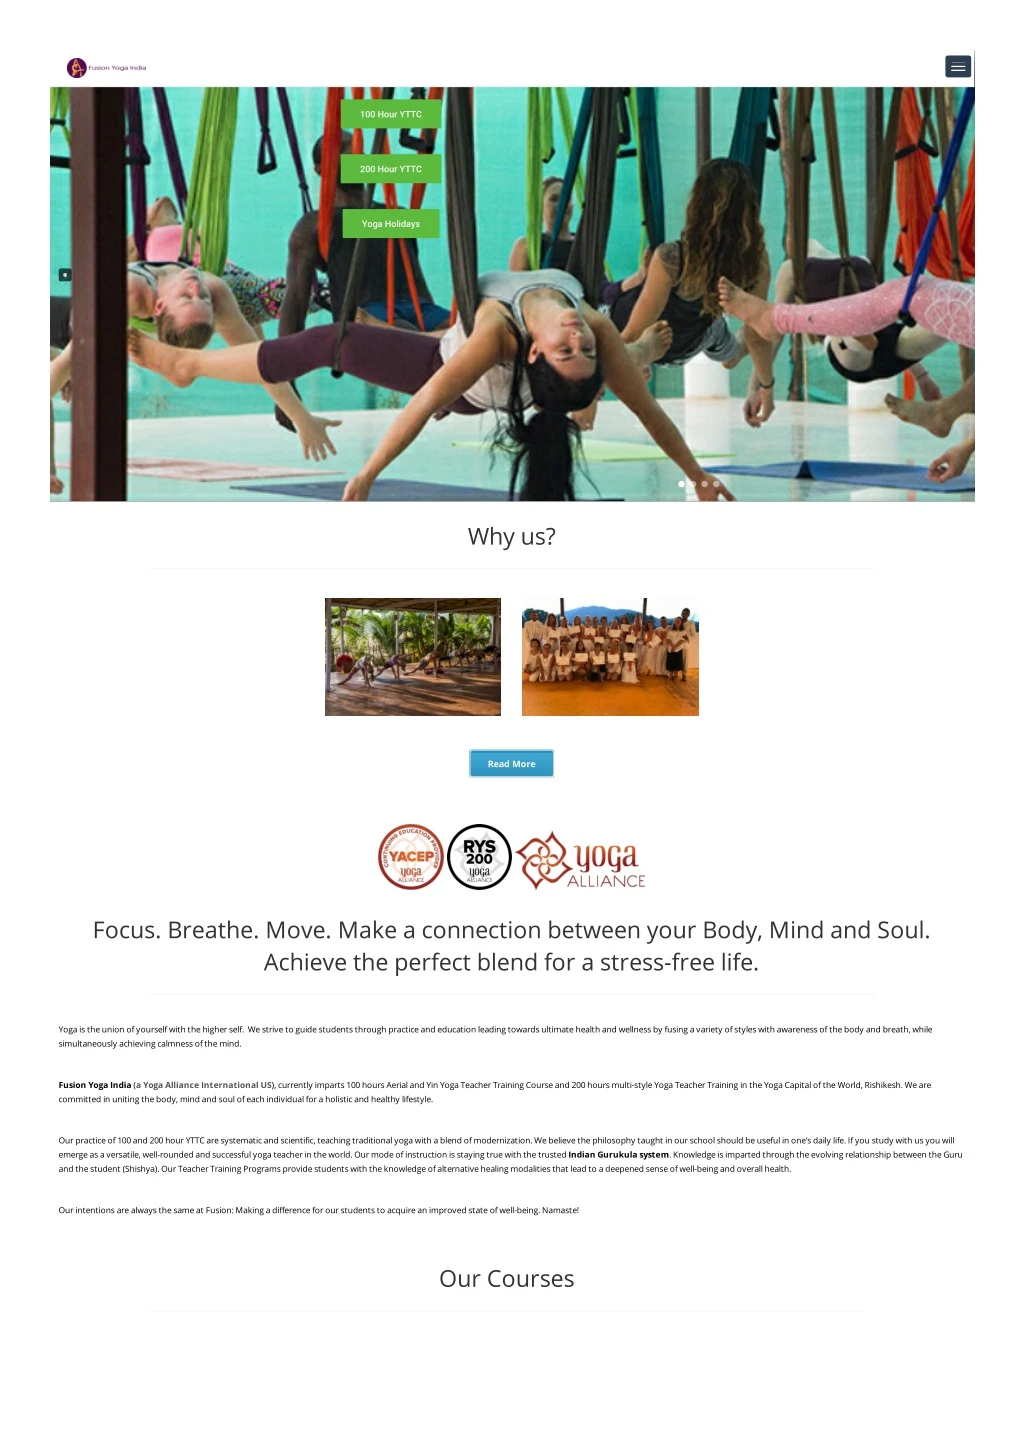 experience anti gravity with aerial yoga